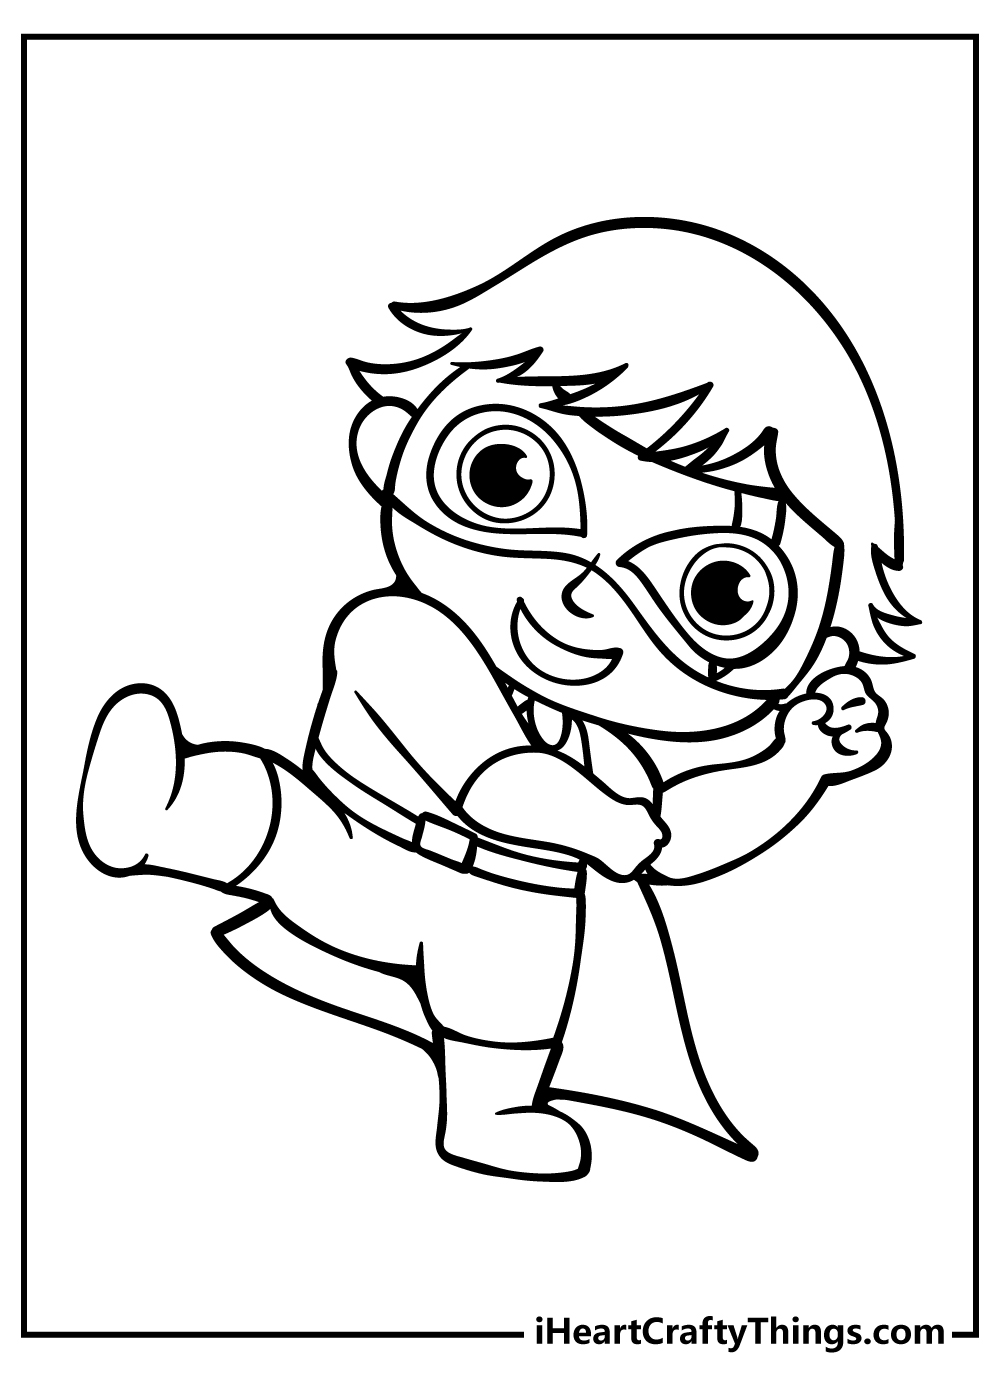 Ryan Coloring Pages for kids free download